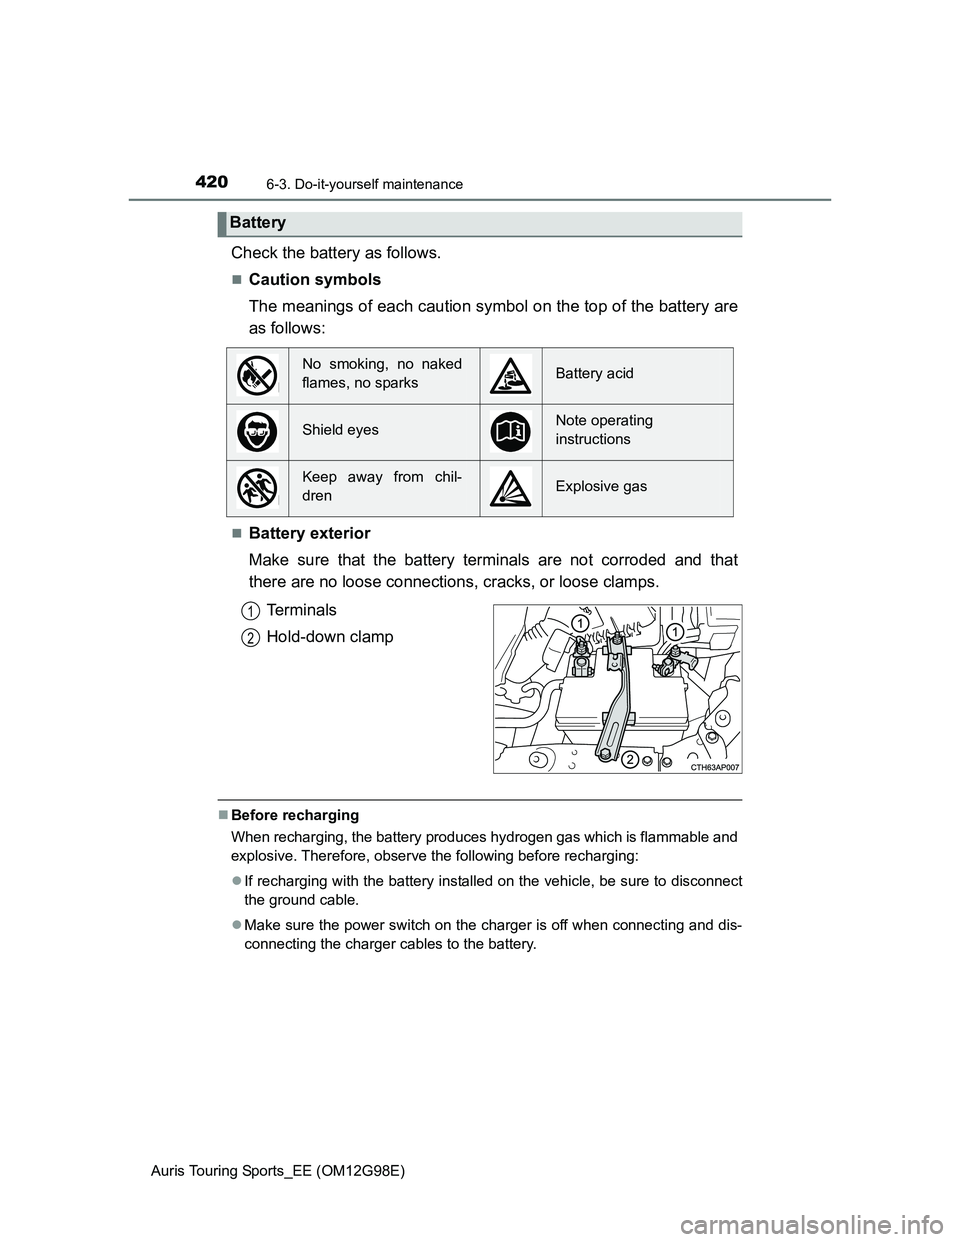 TOYOTA AURIS TOURING SPORTS 2014  Owners Manual 4206-3. Do-it-yourself maintenance
Auris Touring Sports_EE (OM12G98E)
Check the battery as follows.
Caution symbols
The meanings of each caution symbol on the top of the battery are
as follows:
